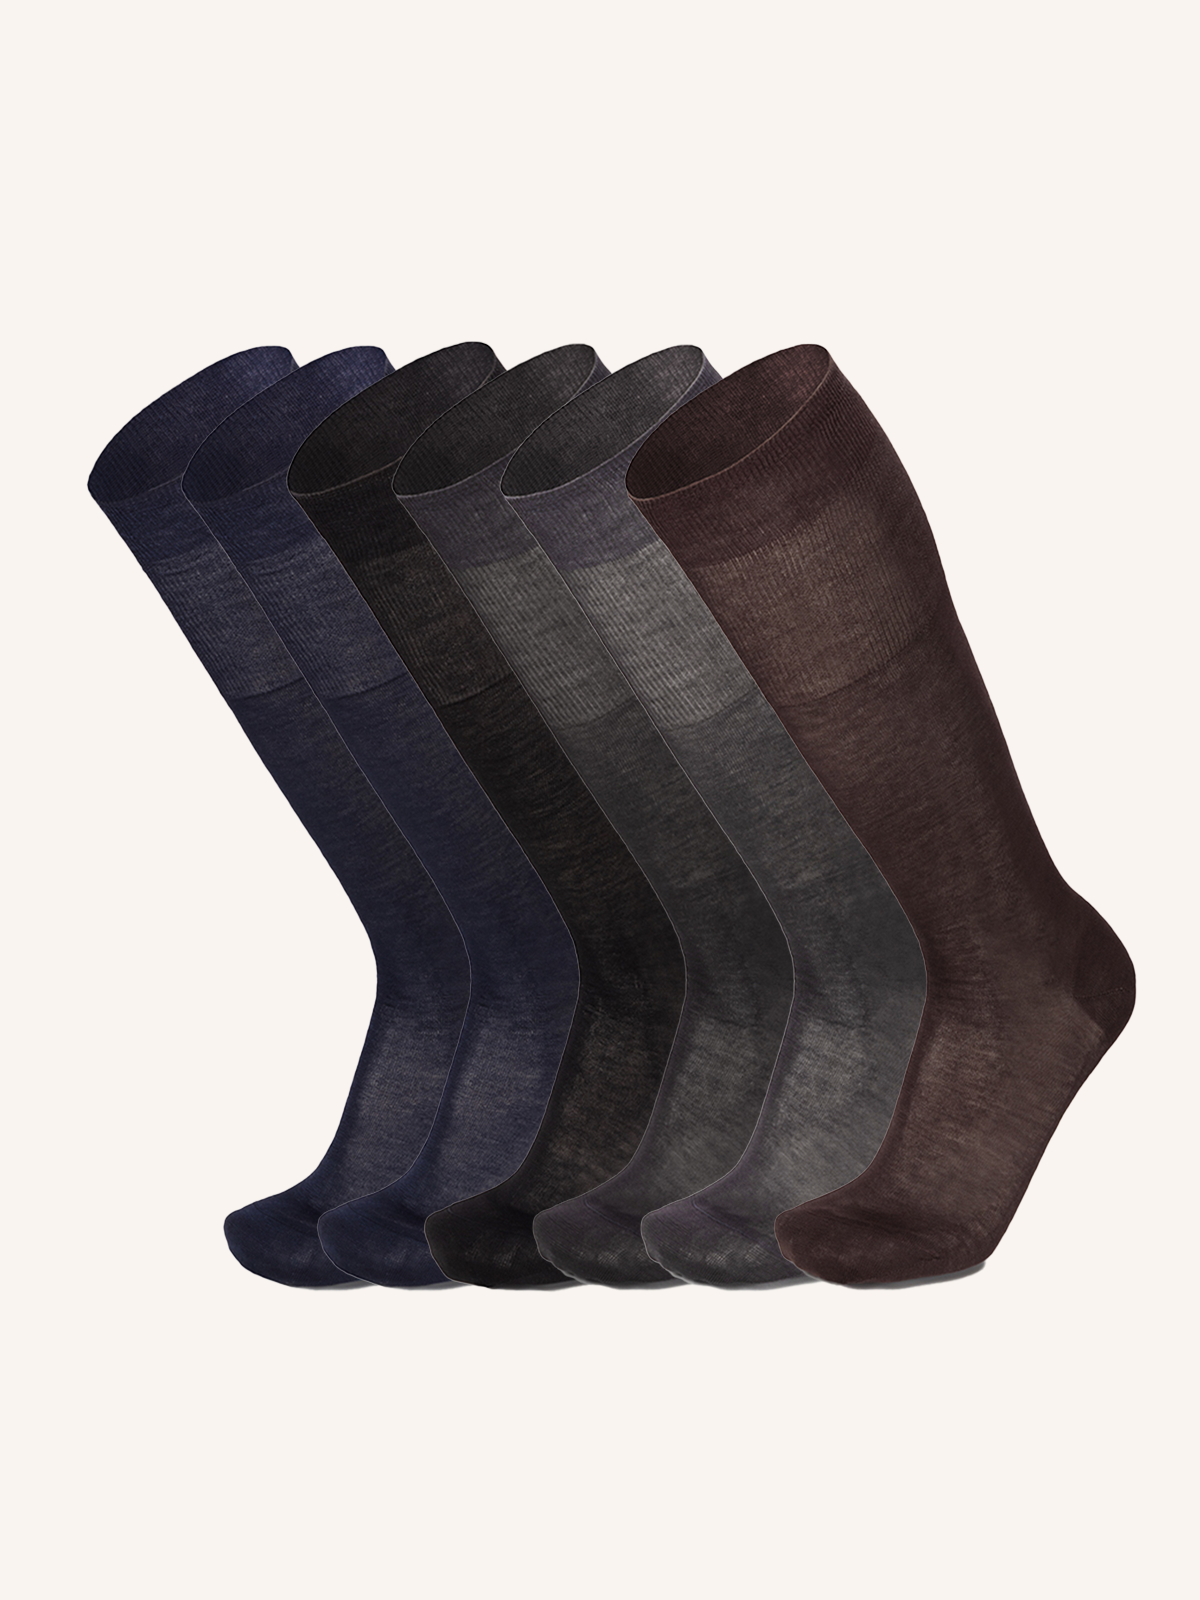 Long Socks in Stretch Cotton Lisle for Men | Plain Color | Pack of 6 pairs | Imperial RL